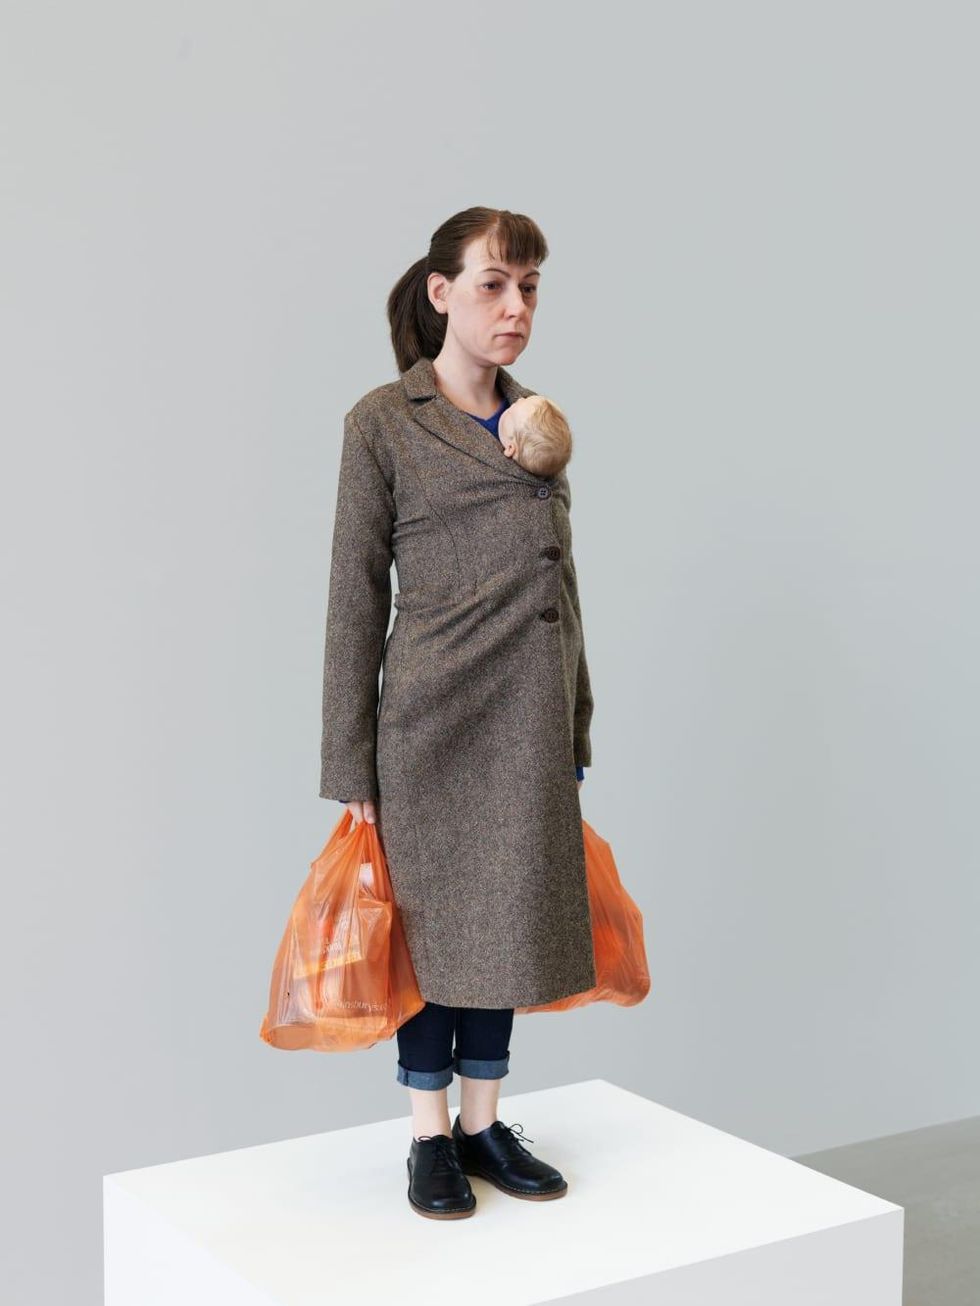 Ron Mueck: Woman with Shopping